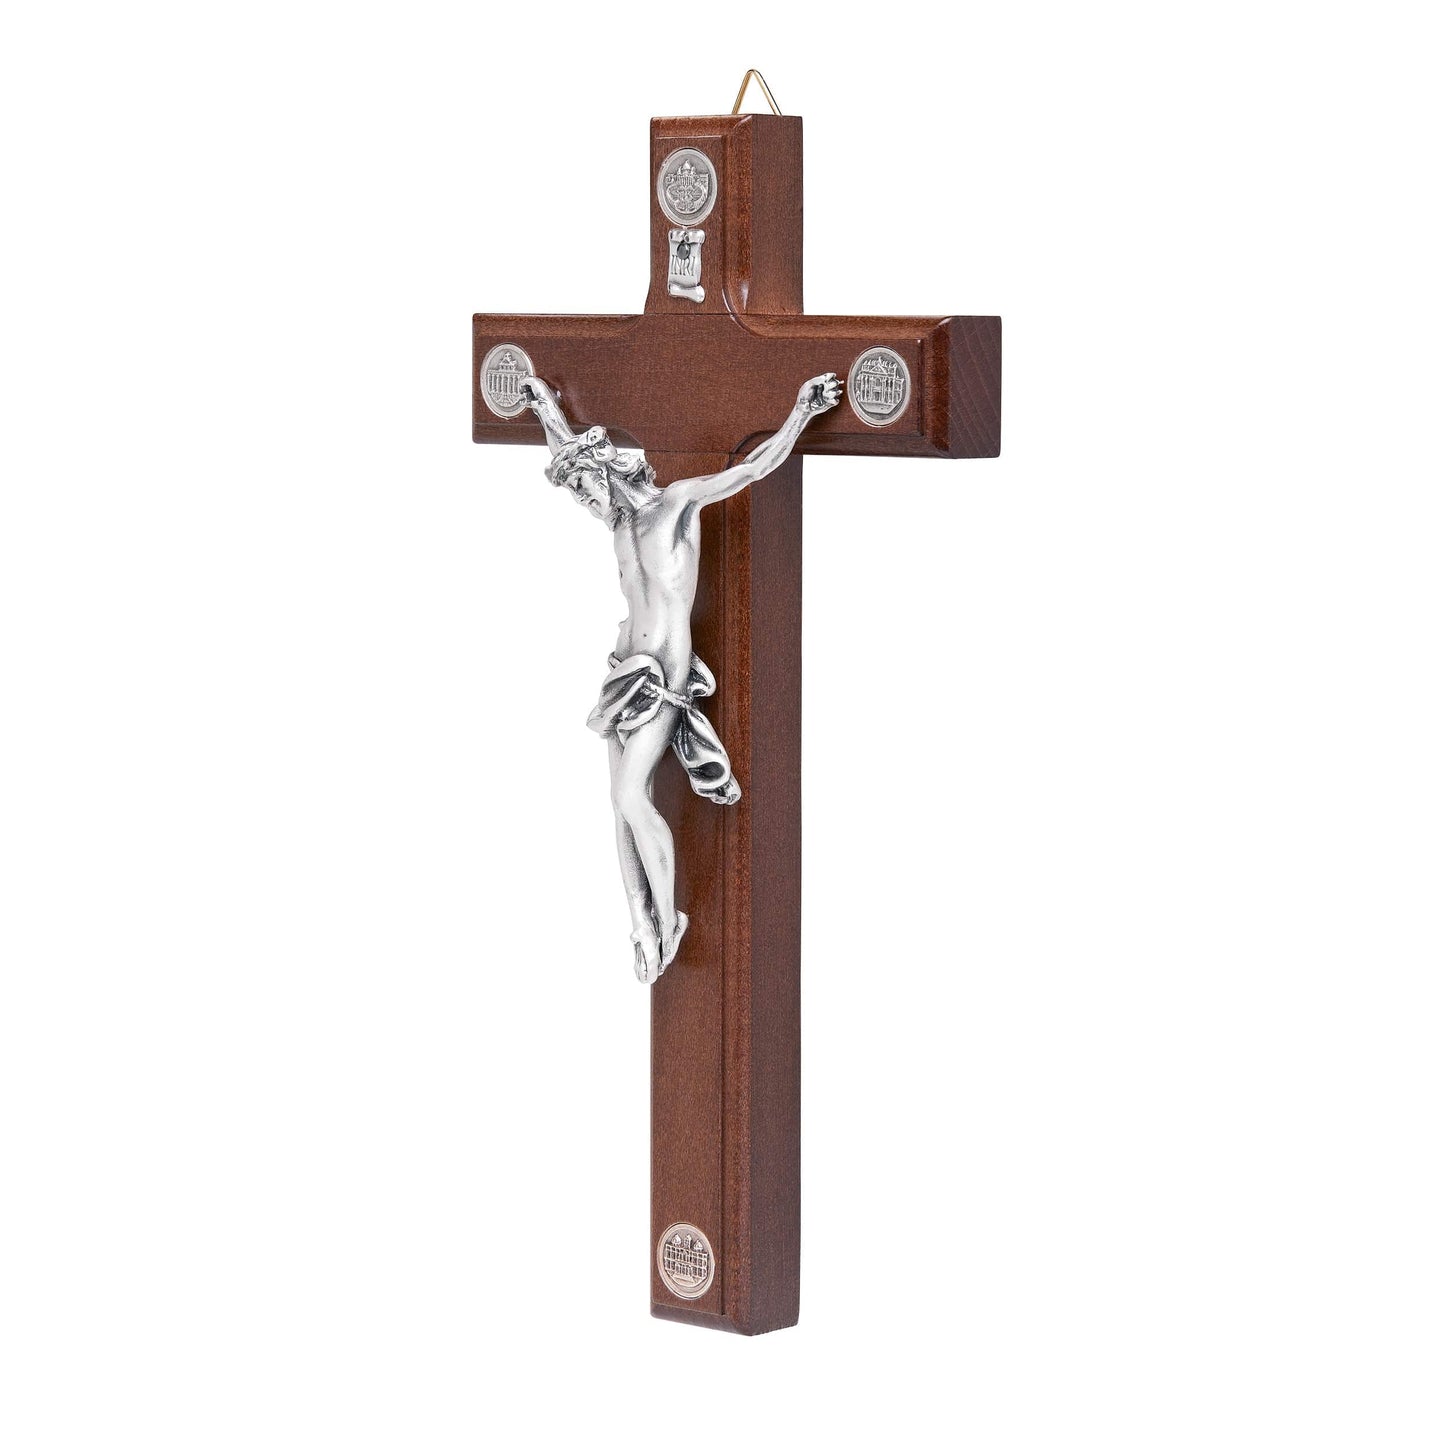 MONDO CATTOLICO 20 cm (8.00 in) Wooden Crucifix With the Four Roman Basilicas Medals